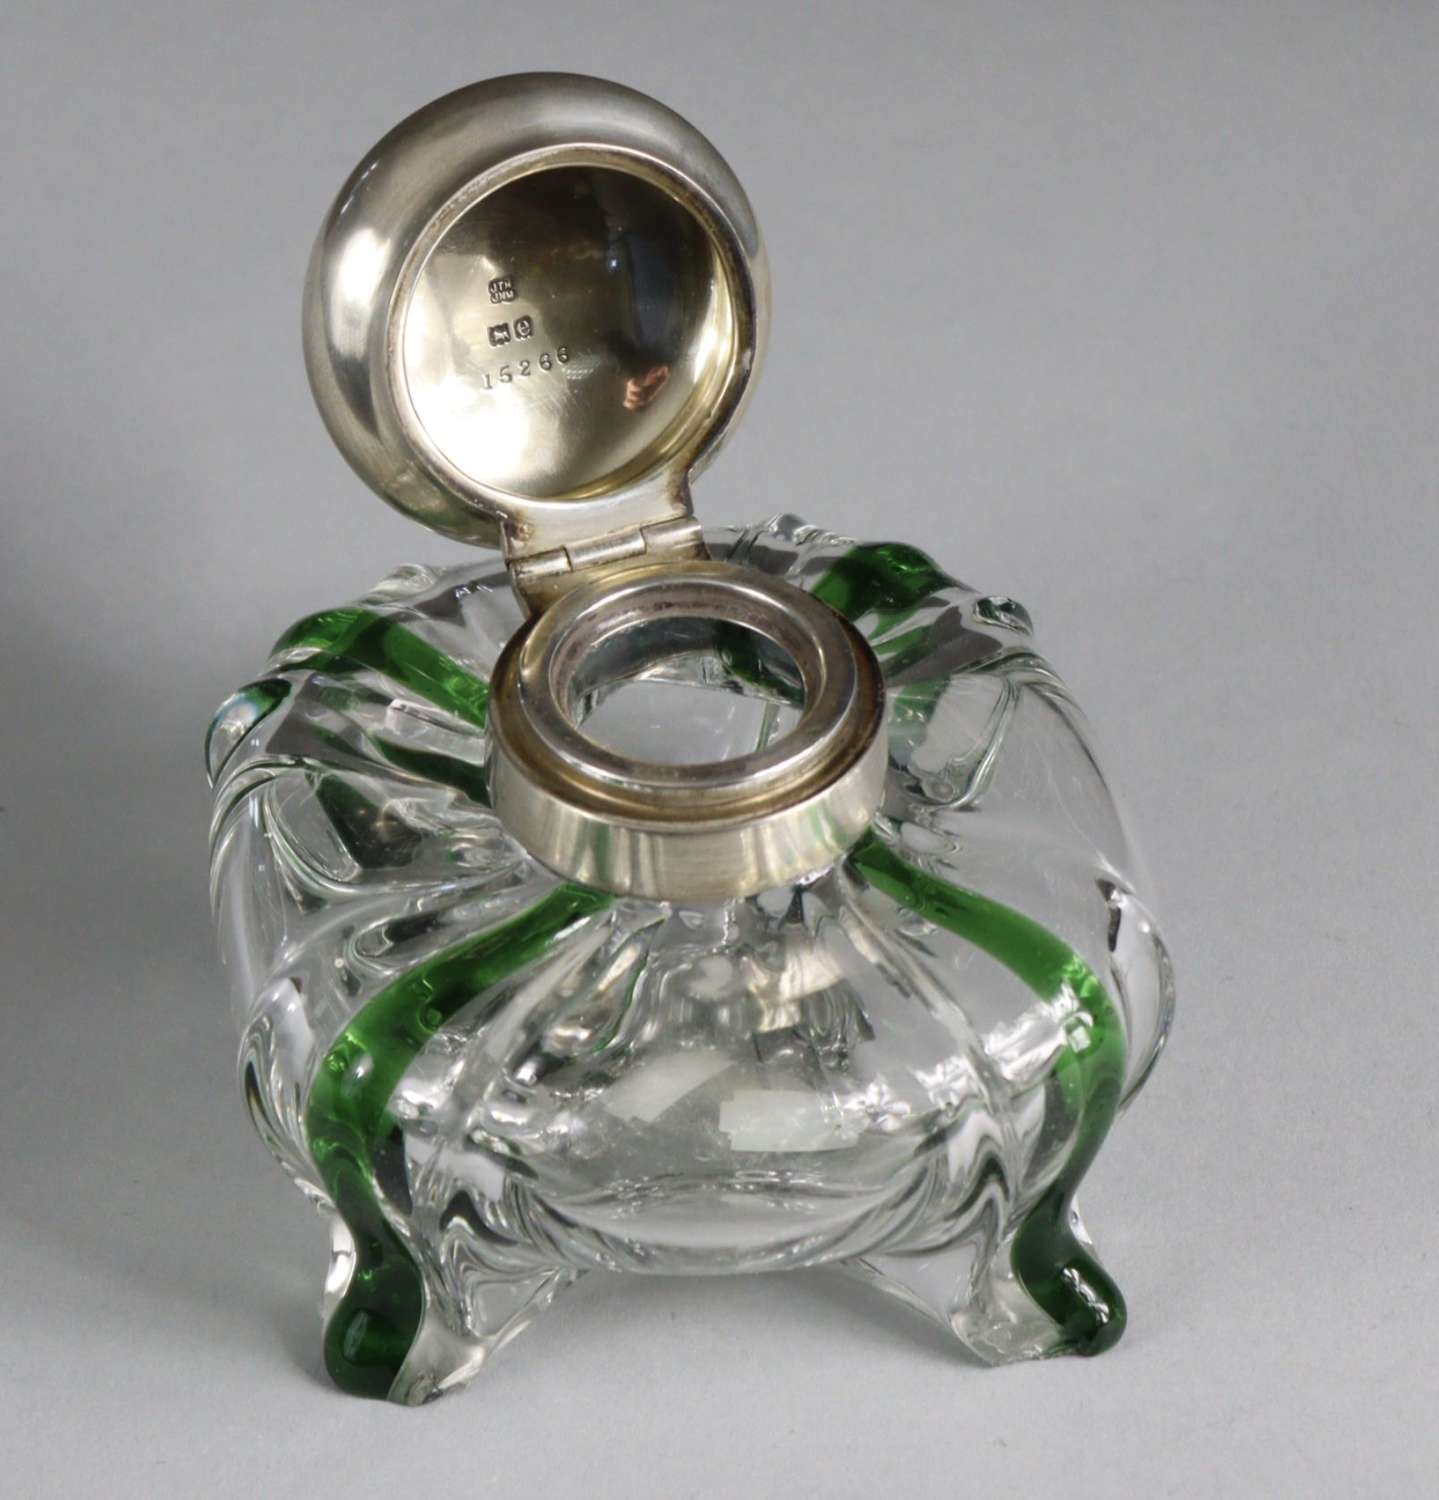 An Art Nouveau inkwell by Heath & Middleton, dated 1896